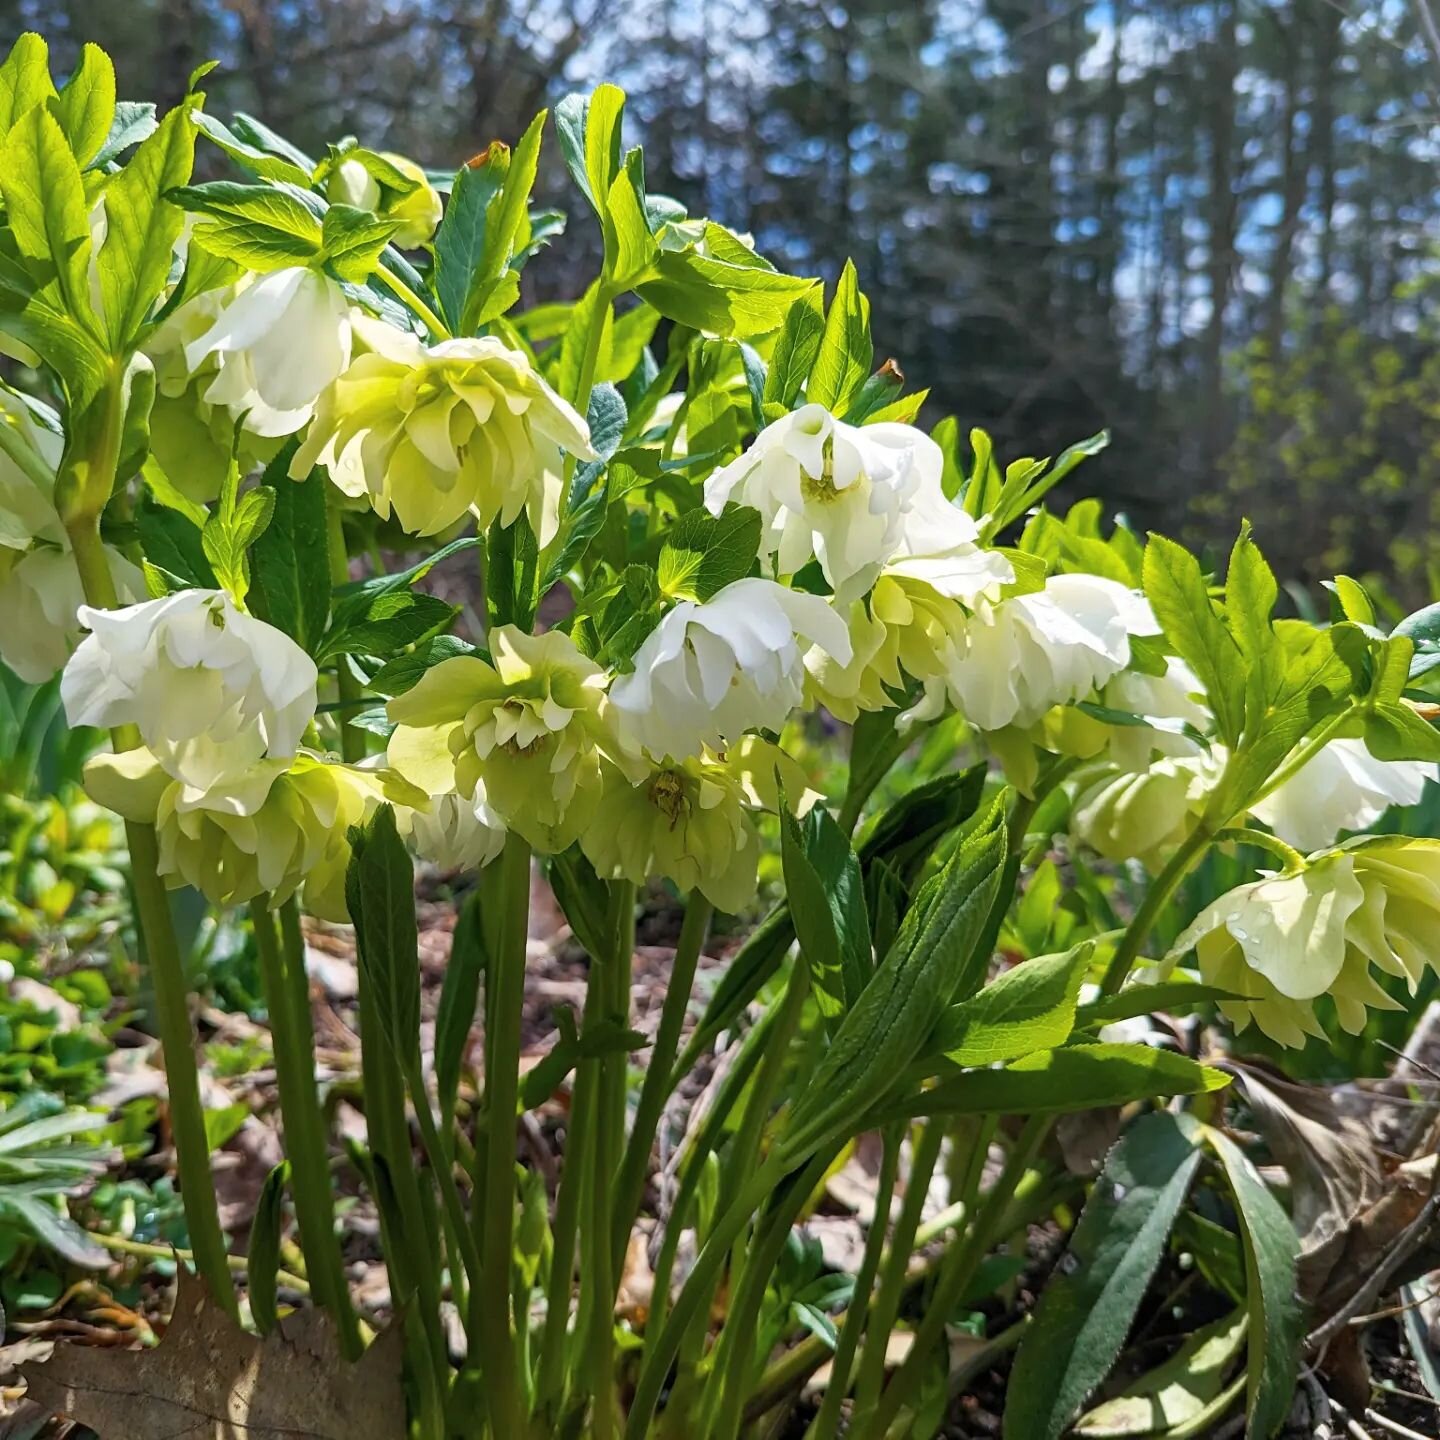 Hellebore looking particularly gorgeous this spring. Anyone else completely in love with these sacred beauties? 

#plantthirsttrap #witchesflyingherbs #ancestralplants #springblooms #favoritespringflowers